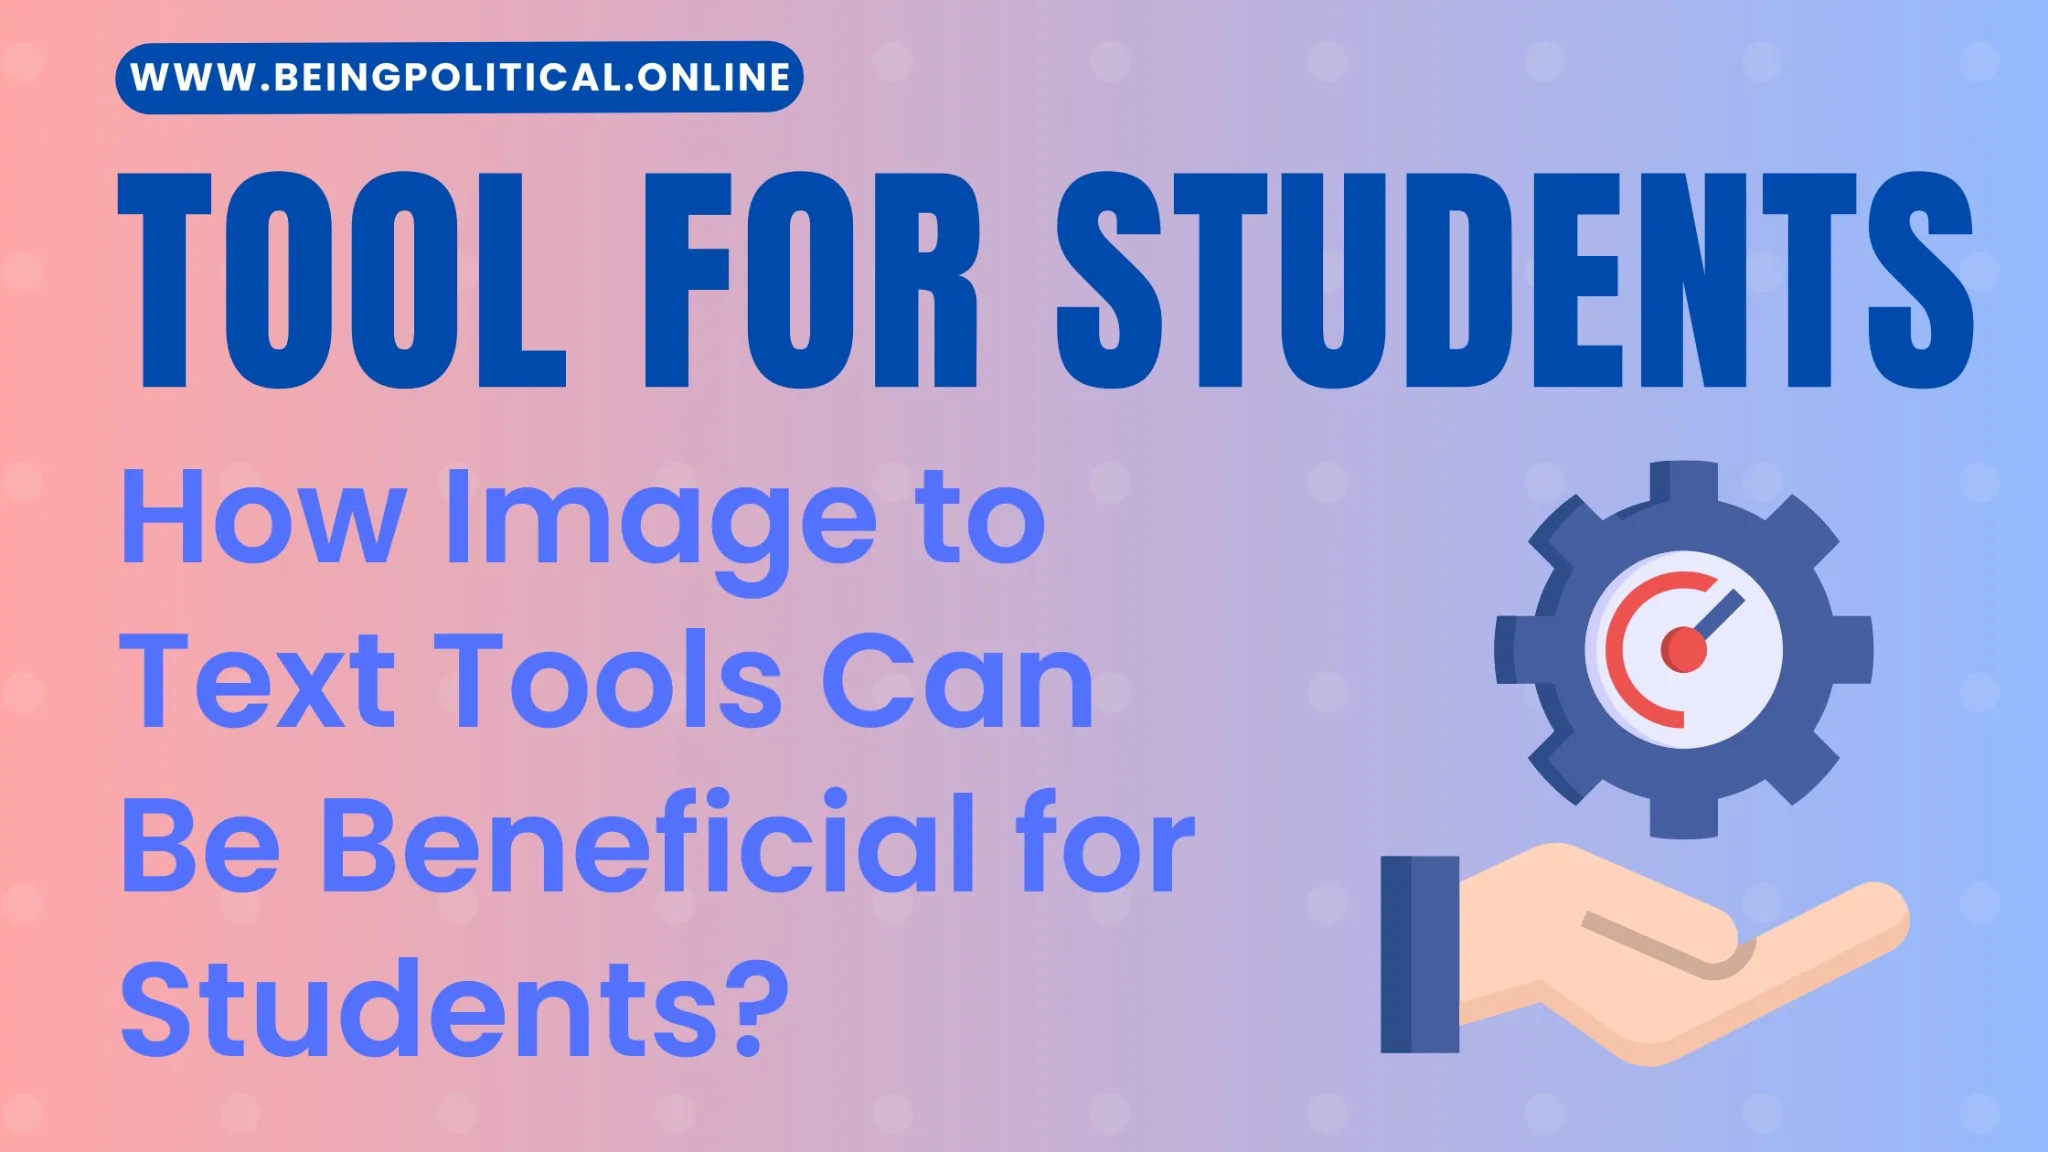 How Image to Text Tools Can Be Beneficial for Students?